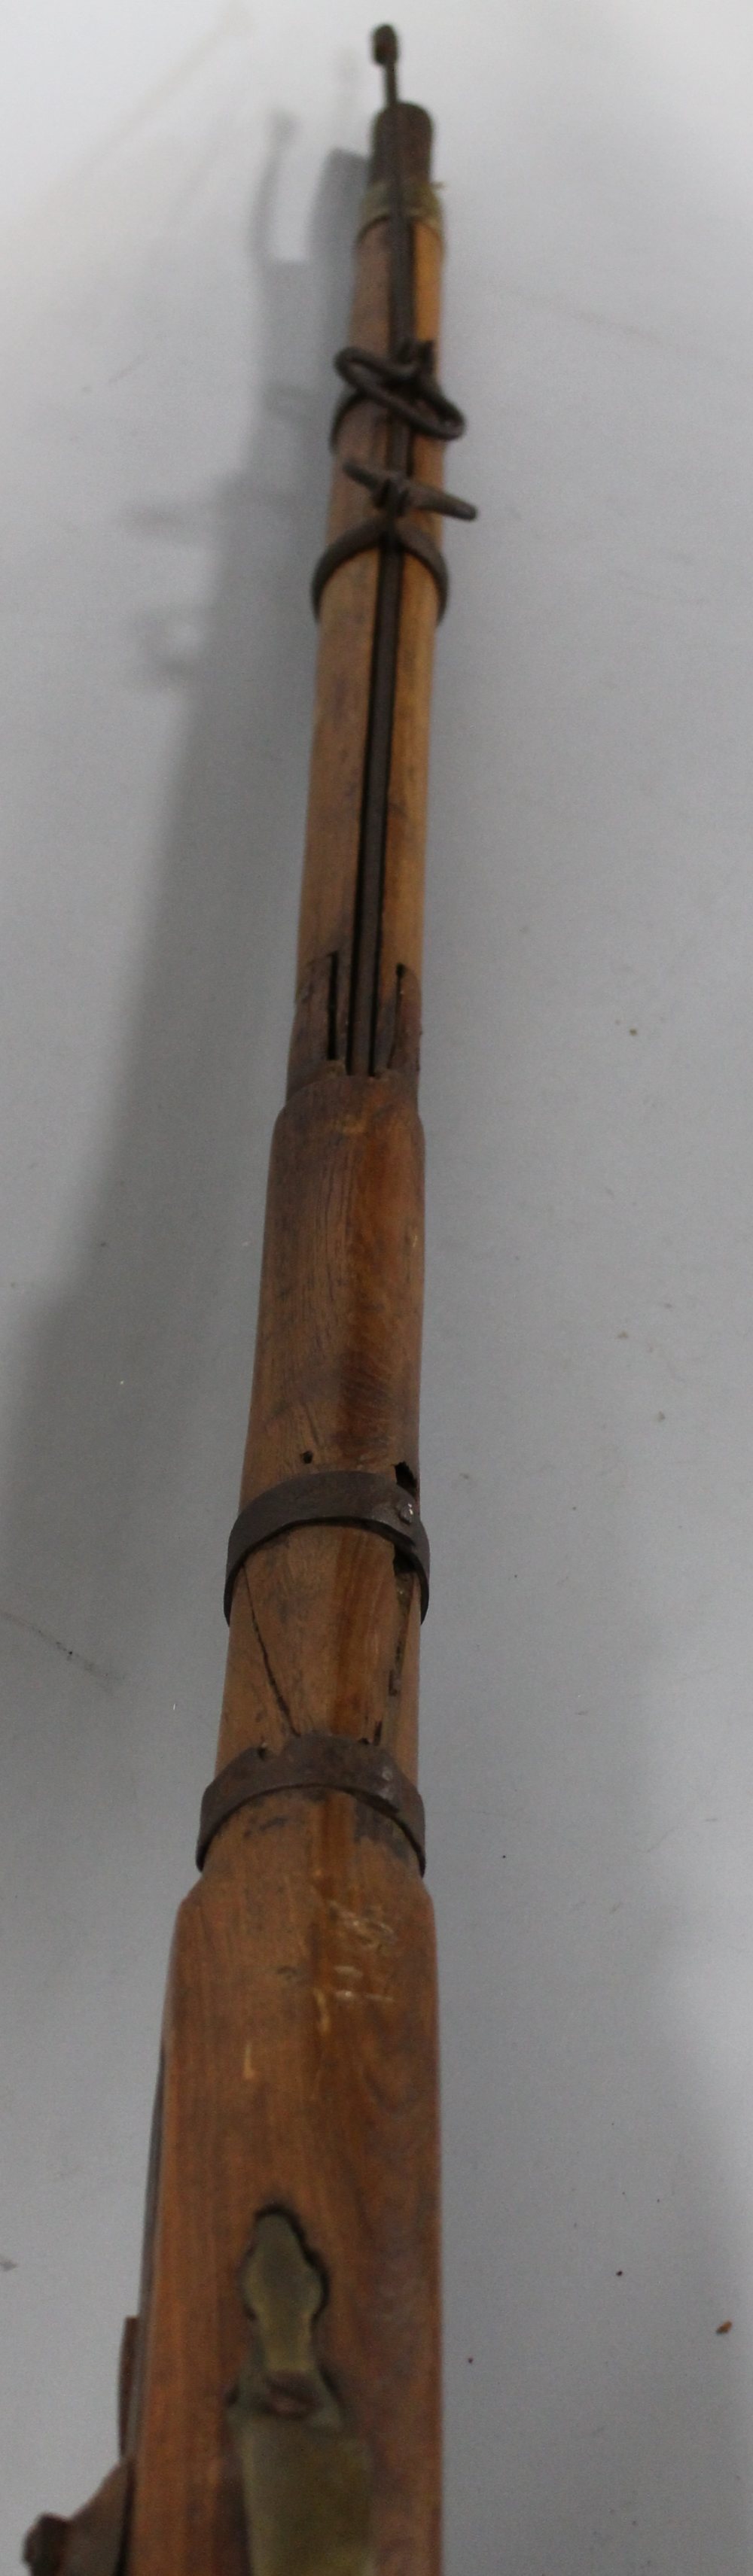 A 19TH CENTURY MUZZLE LOADING PERCUSSION FIRE RIFLE,  butt with brass end plate, the woodwork - Image 4 of 5